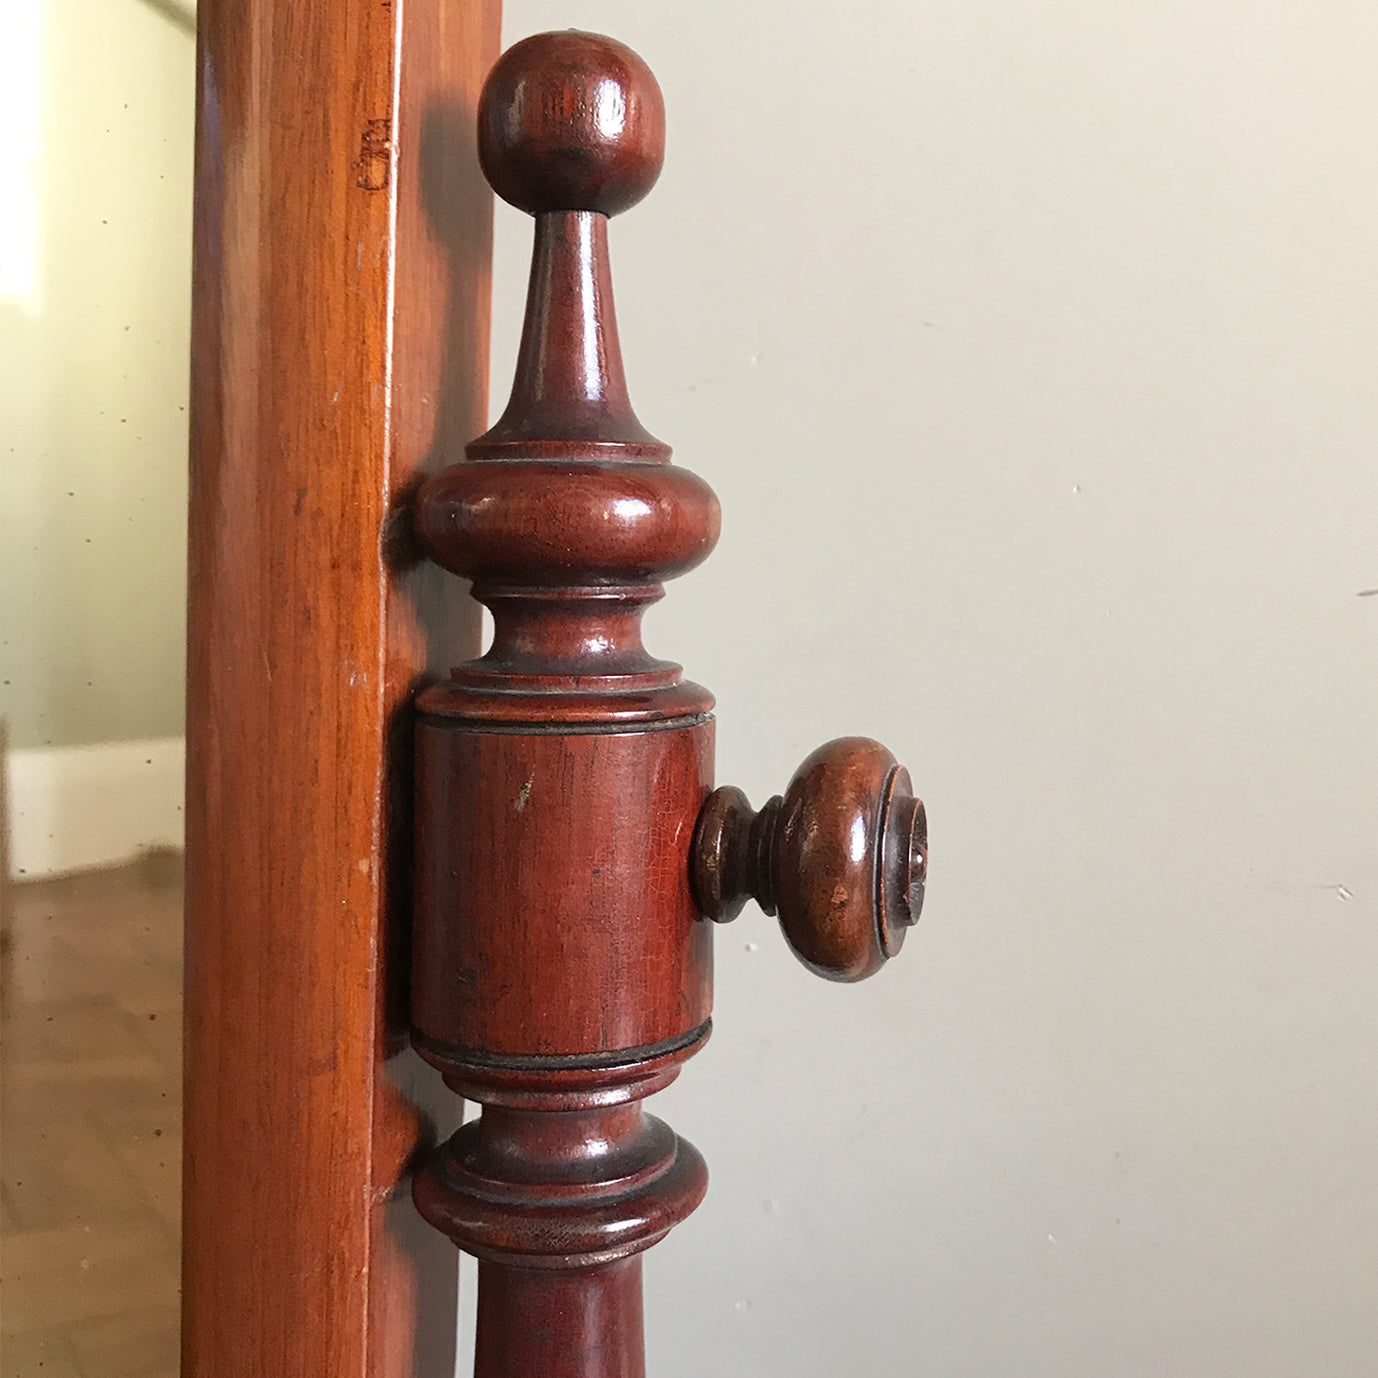 Pretty and versatile mahogany veneered Victorian dressing table mirror, with turned mirror frame supports. Lovely warm tone with an elegant scalloped front - SHOP NOW - www.intovintage.co.uk